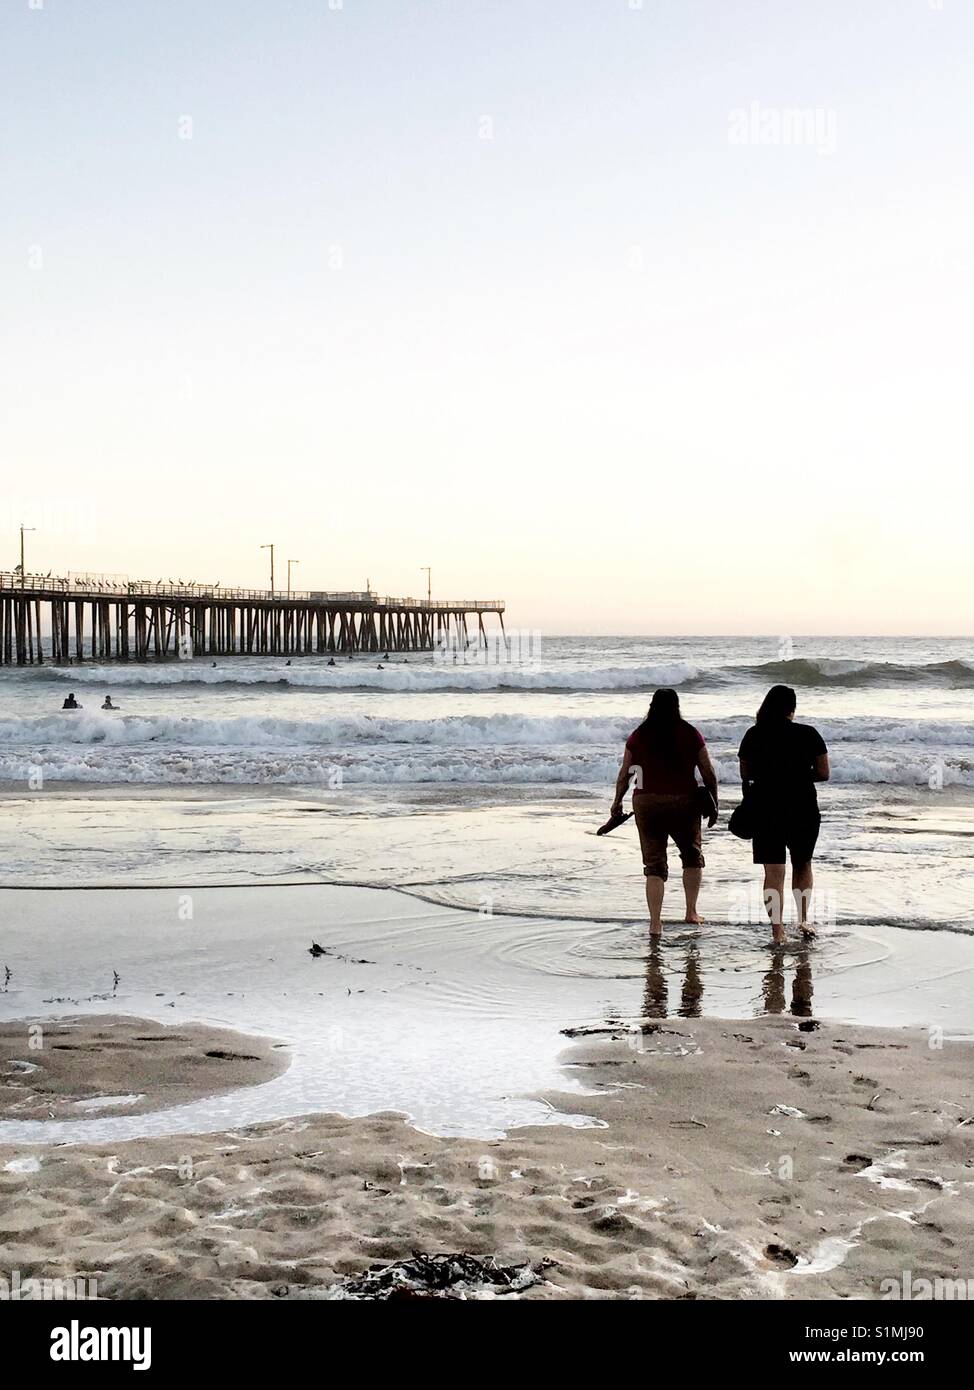 Two women step into the water during their evening beach walk. Scenic California seaside with iconic long pier and silhouette of two women at waters edge. Stock Photo